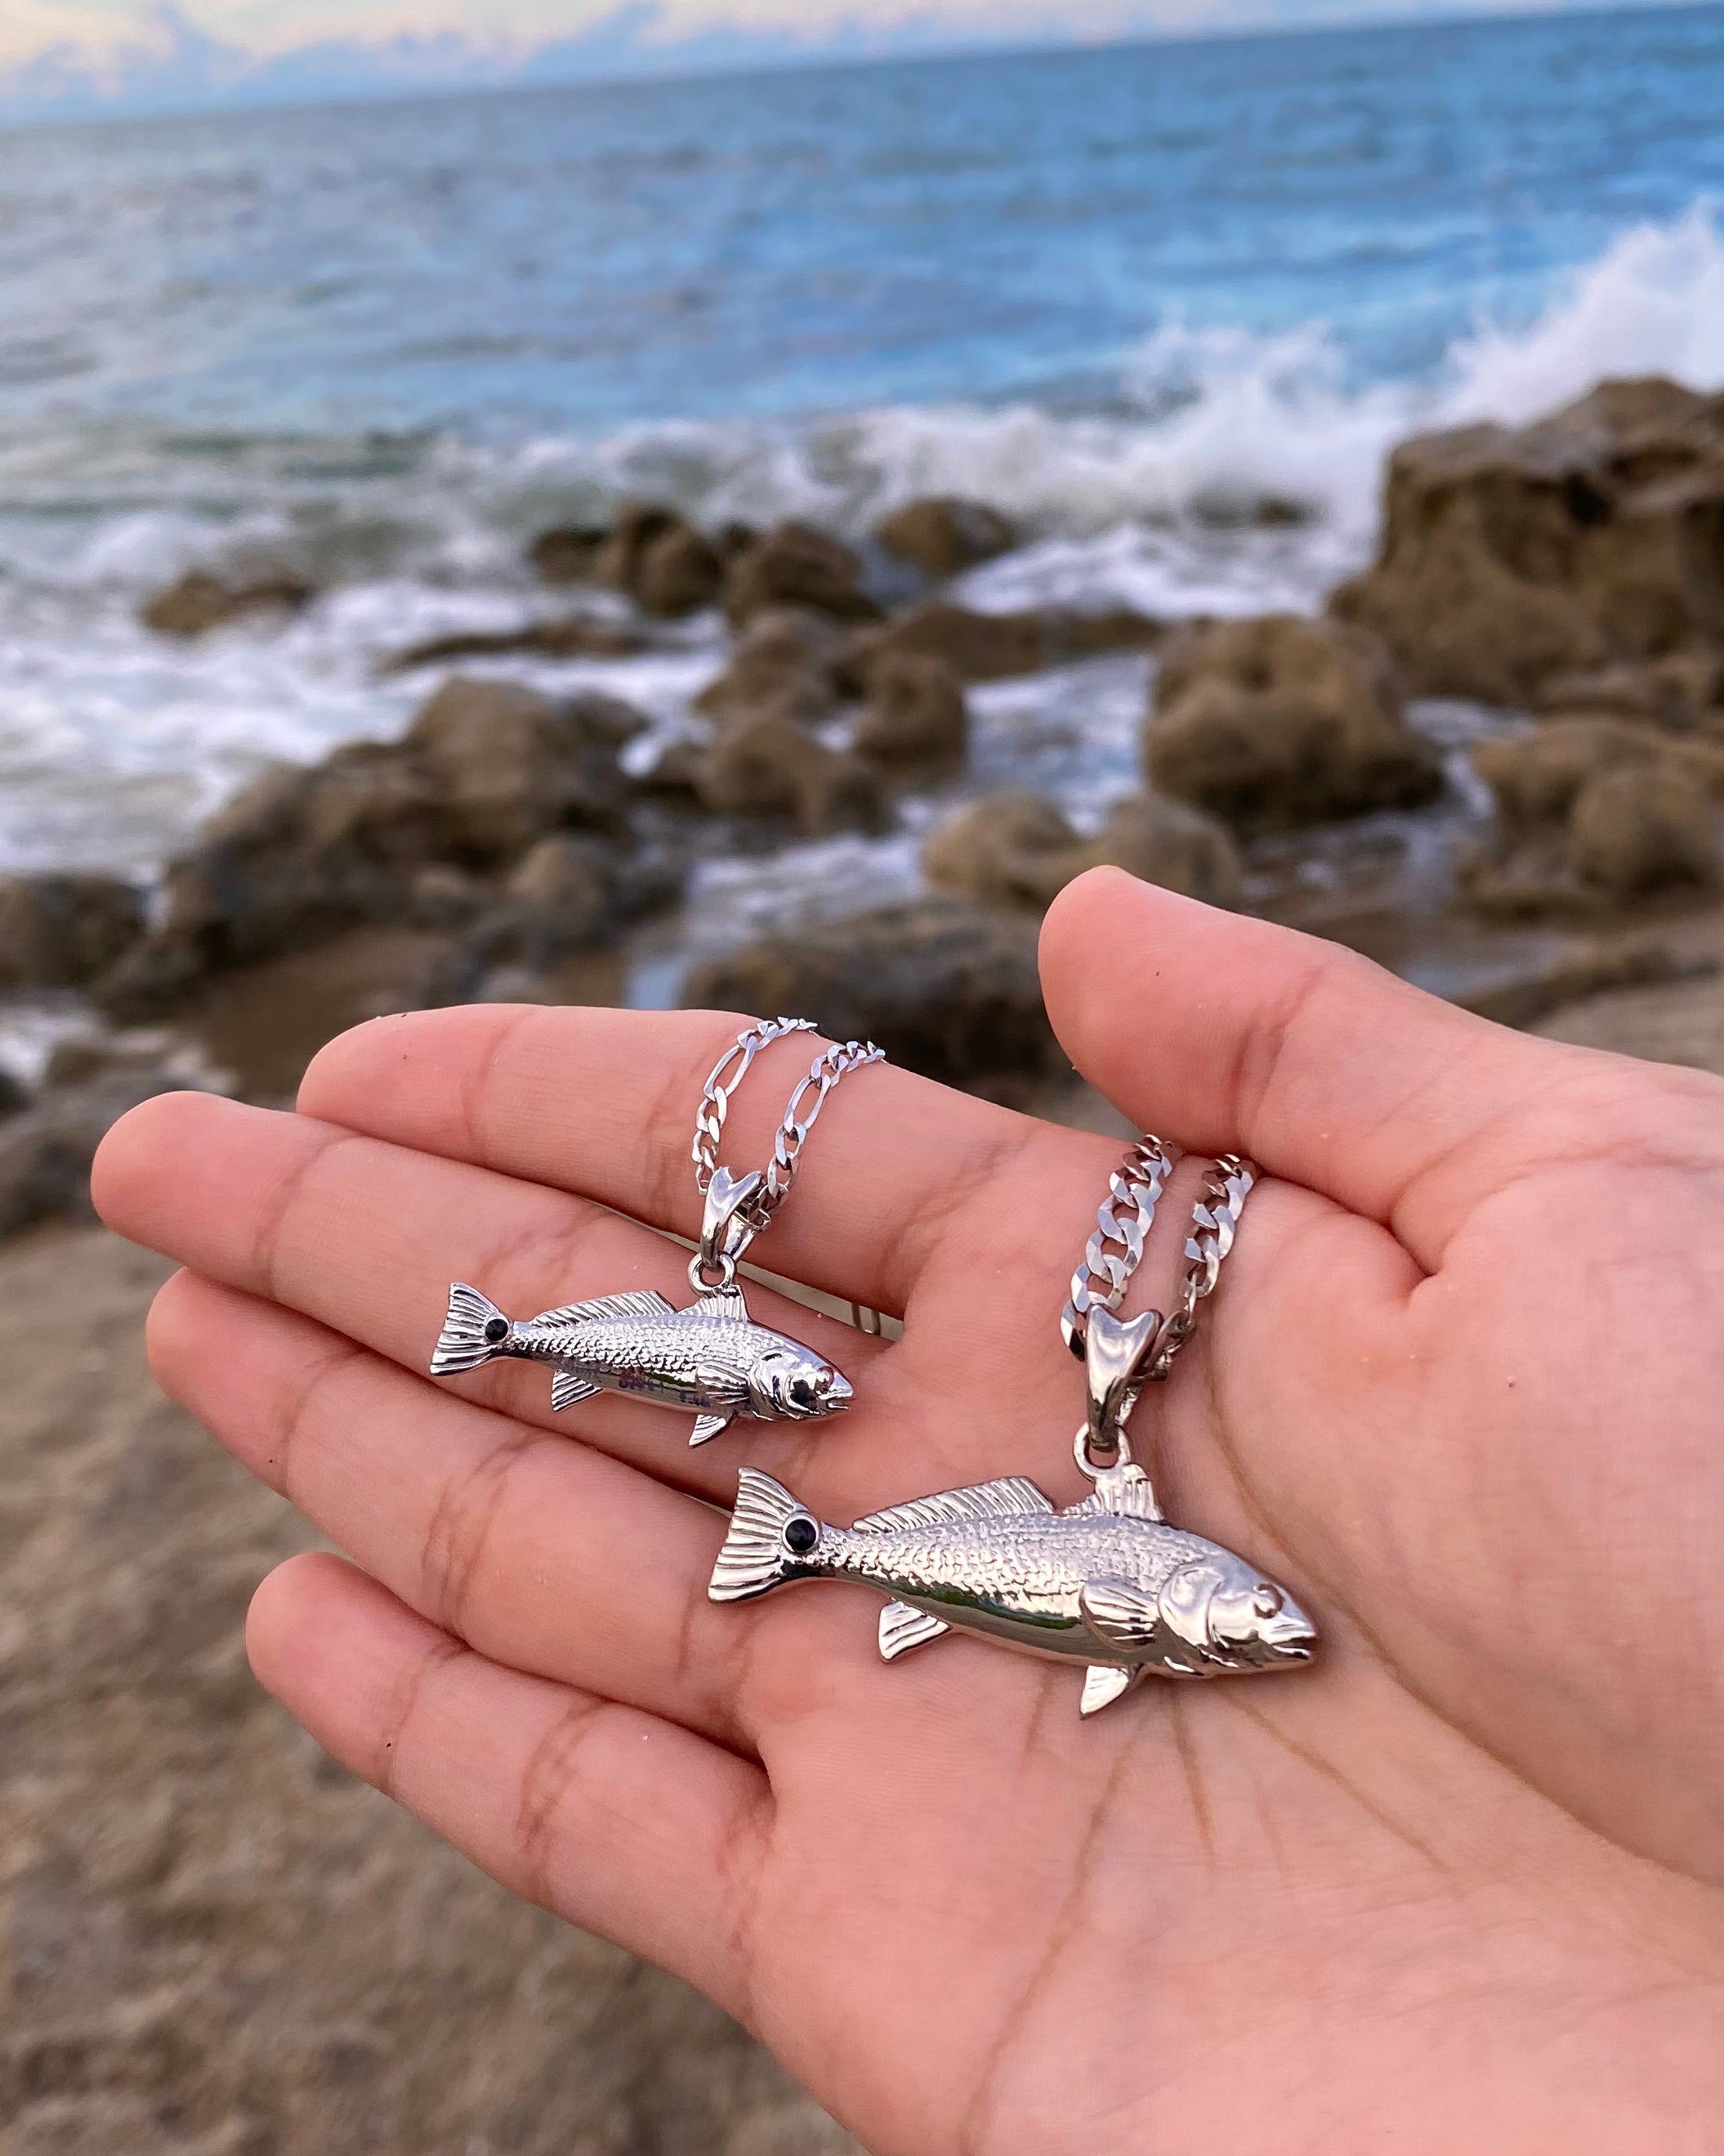 Standard and Small size Redfish necklaces in silver by Castil.